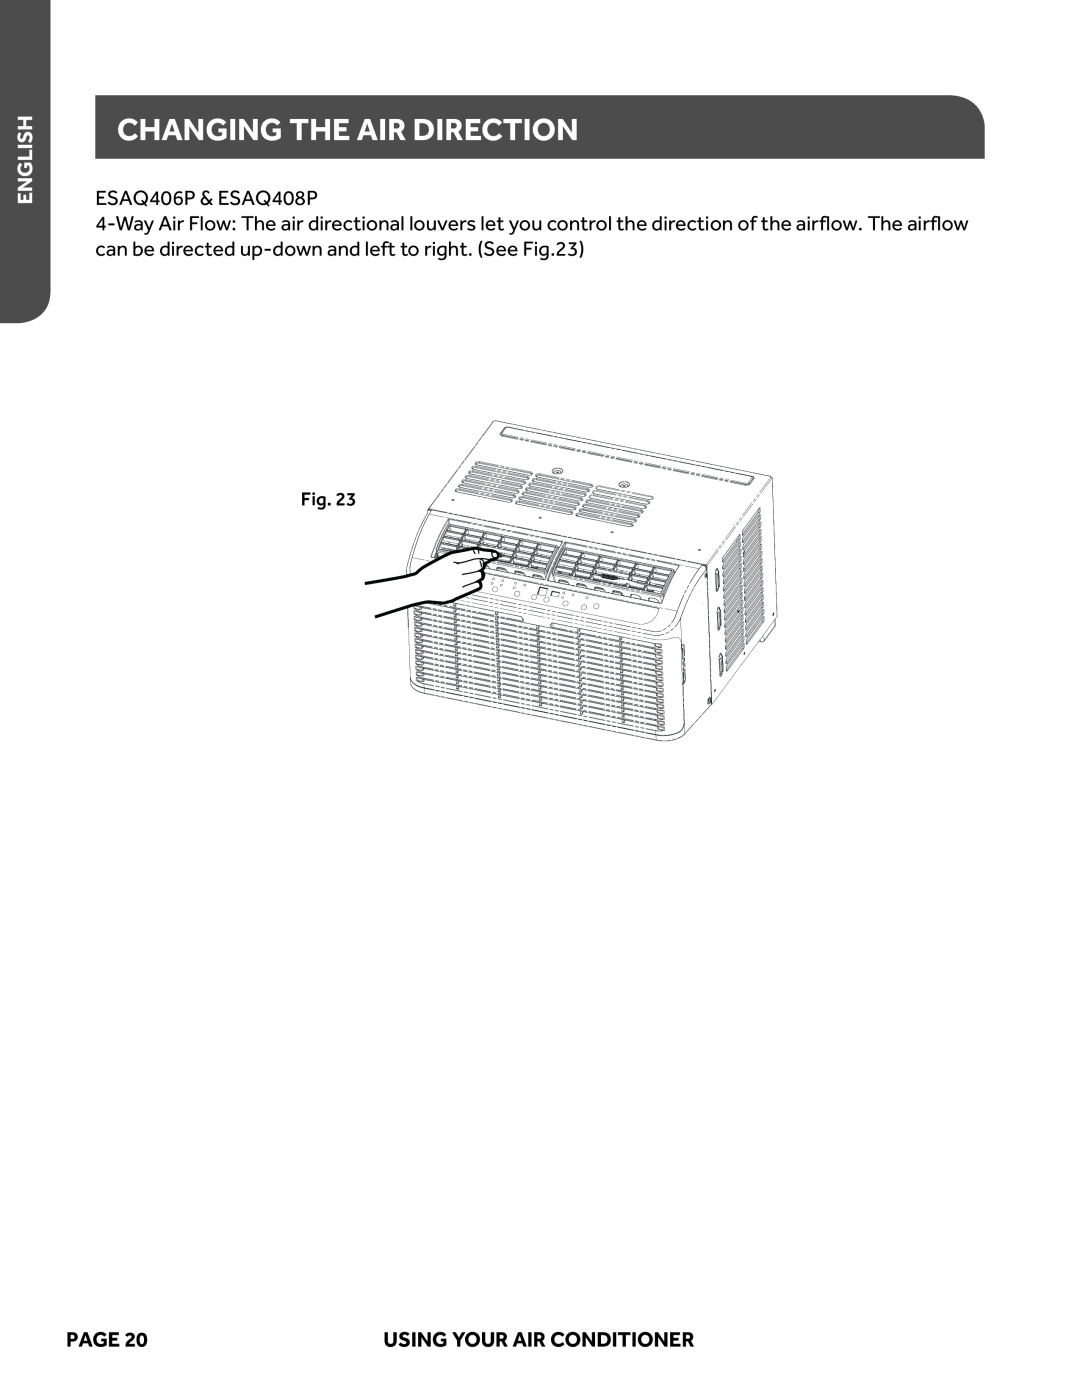 Haier user manual Changing The Air Direction, English, ESAQ406P & ESAQ408P, Page, Using Your Air Conditioner 